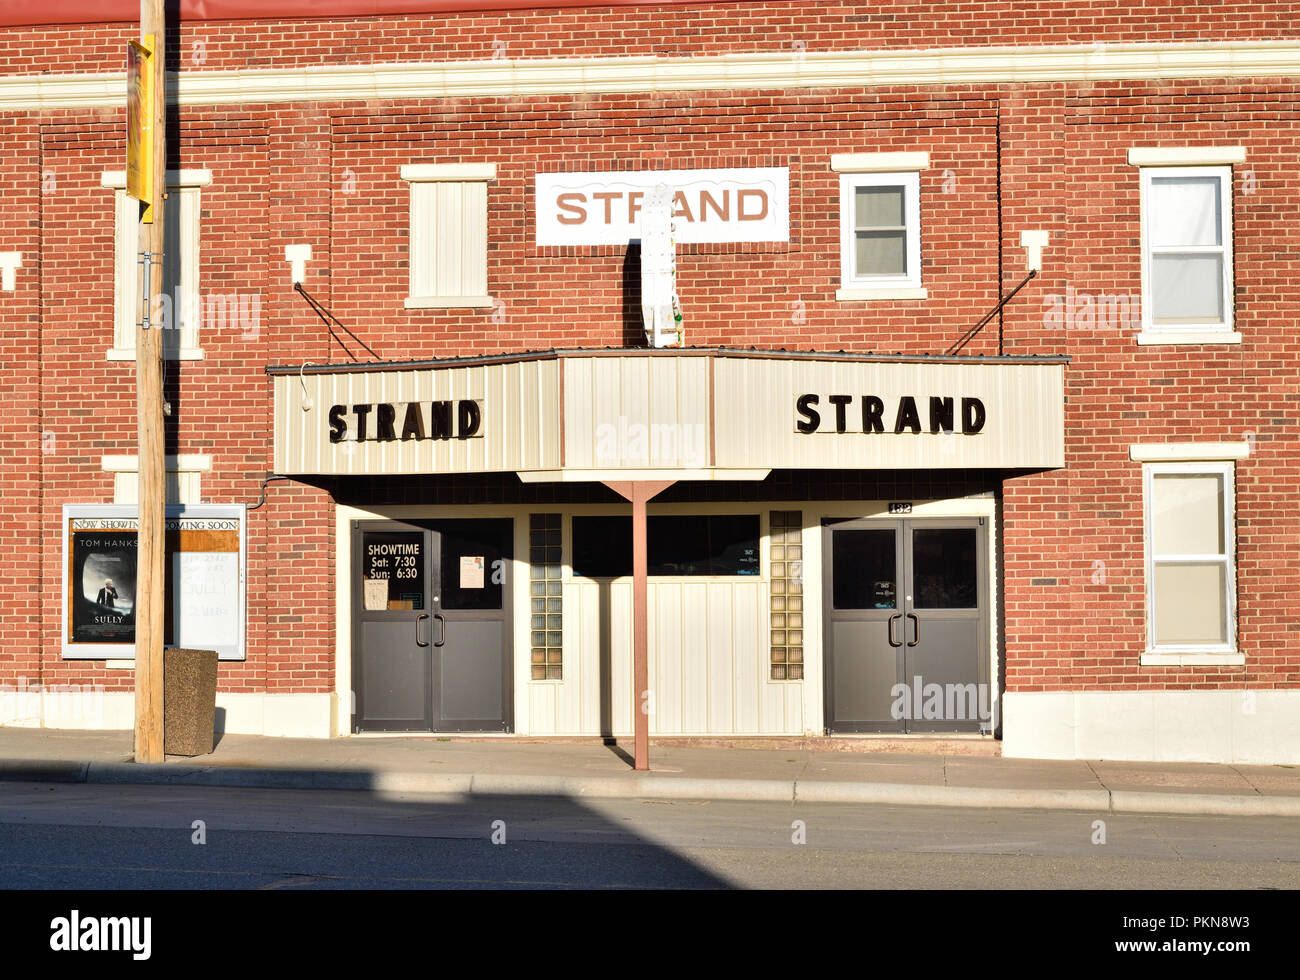 Strand small town theater in western Kansas Stock Photo